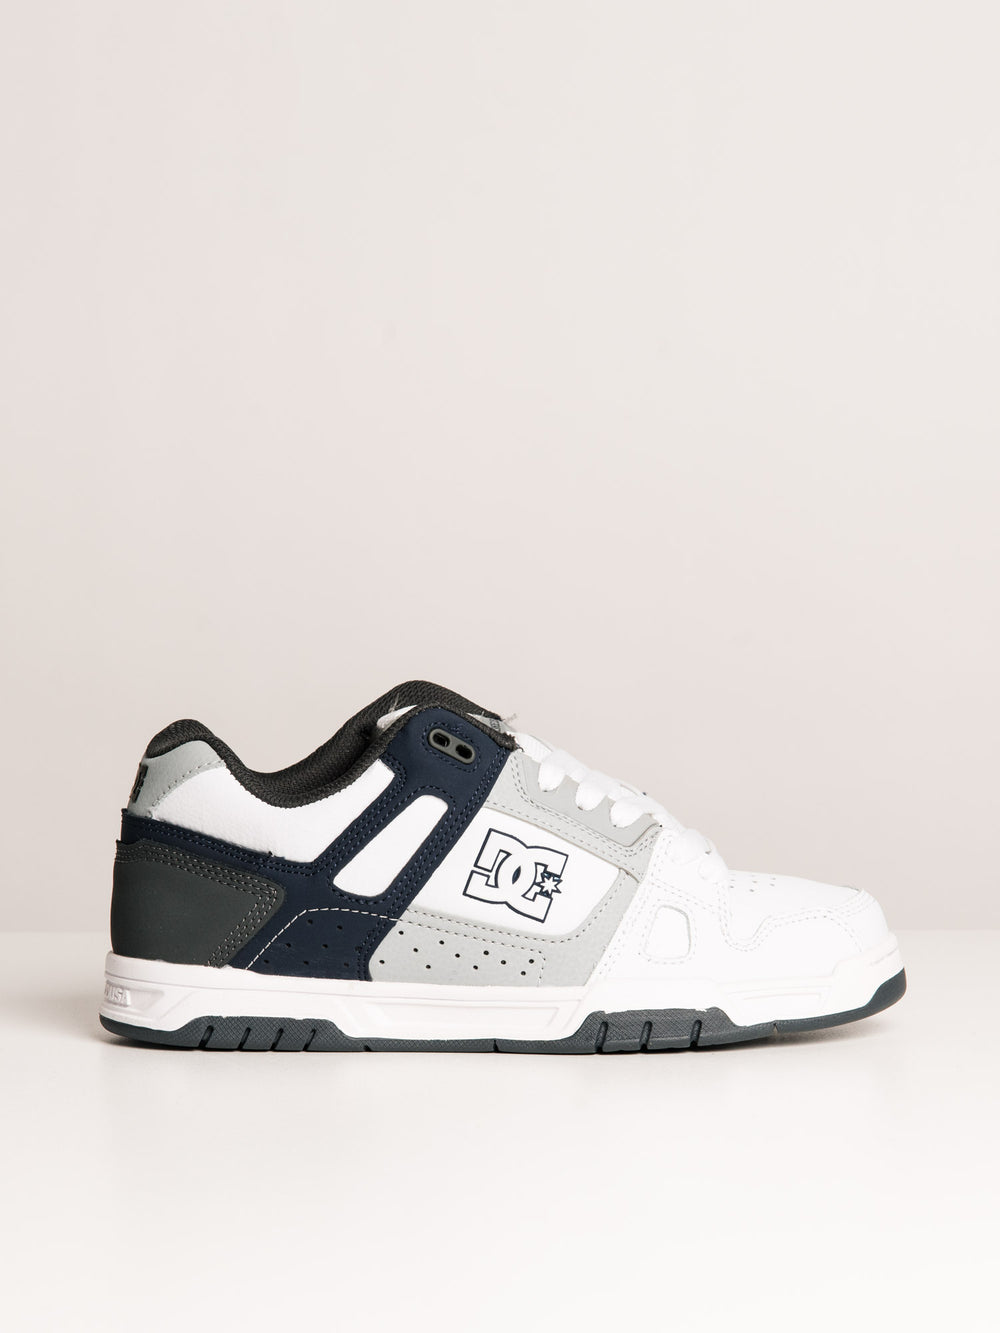 MENS DC SHOES STAG SNEAKER - CLEARANCE